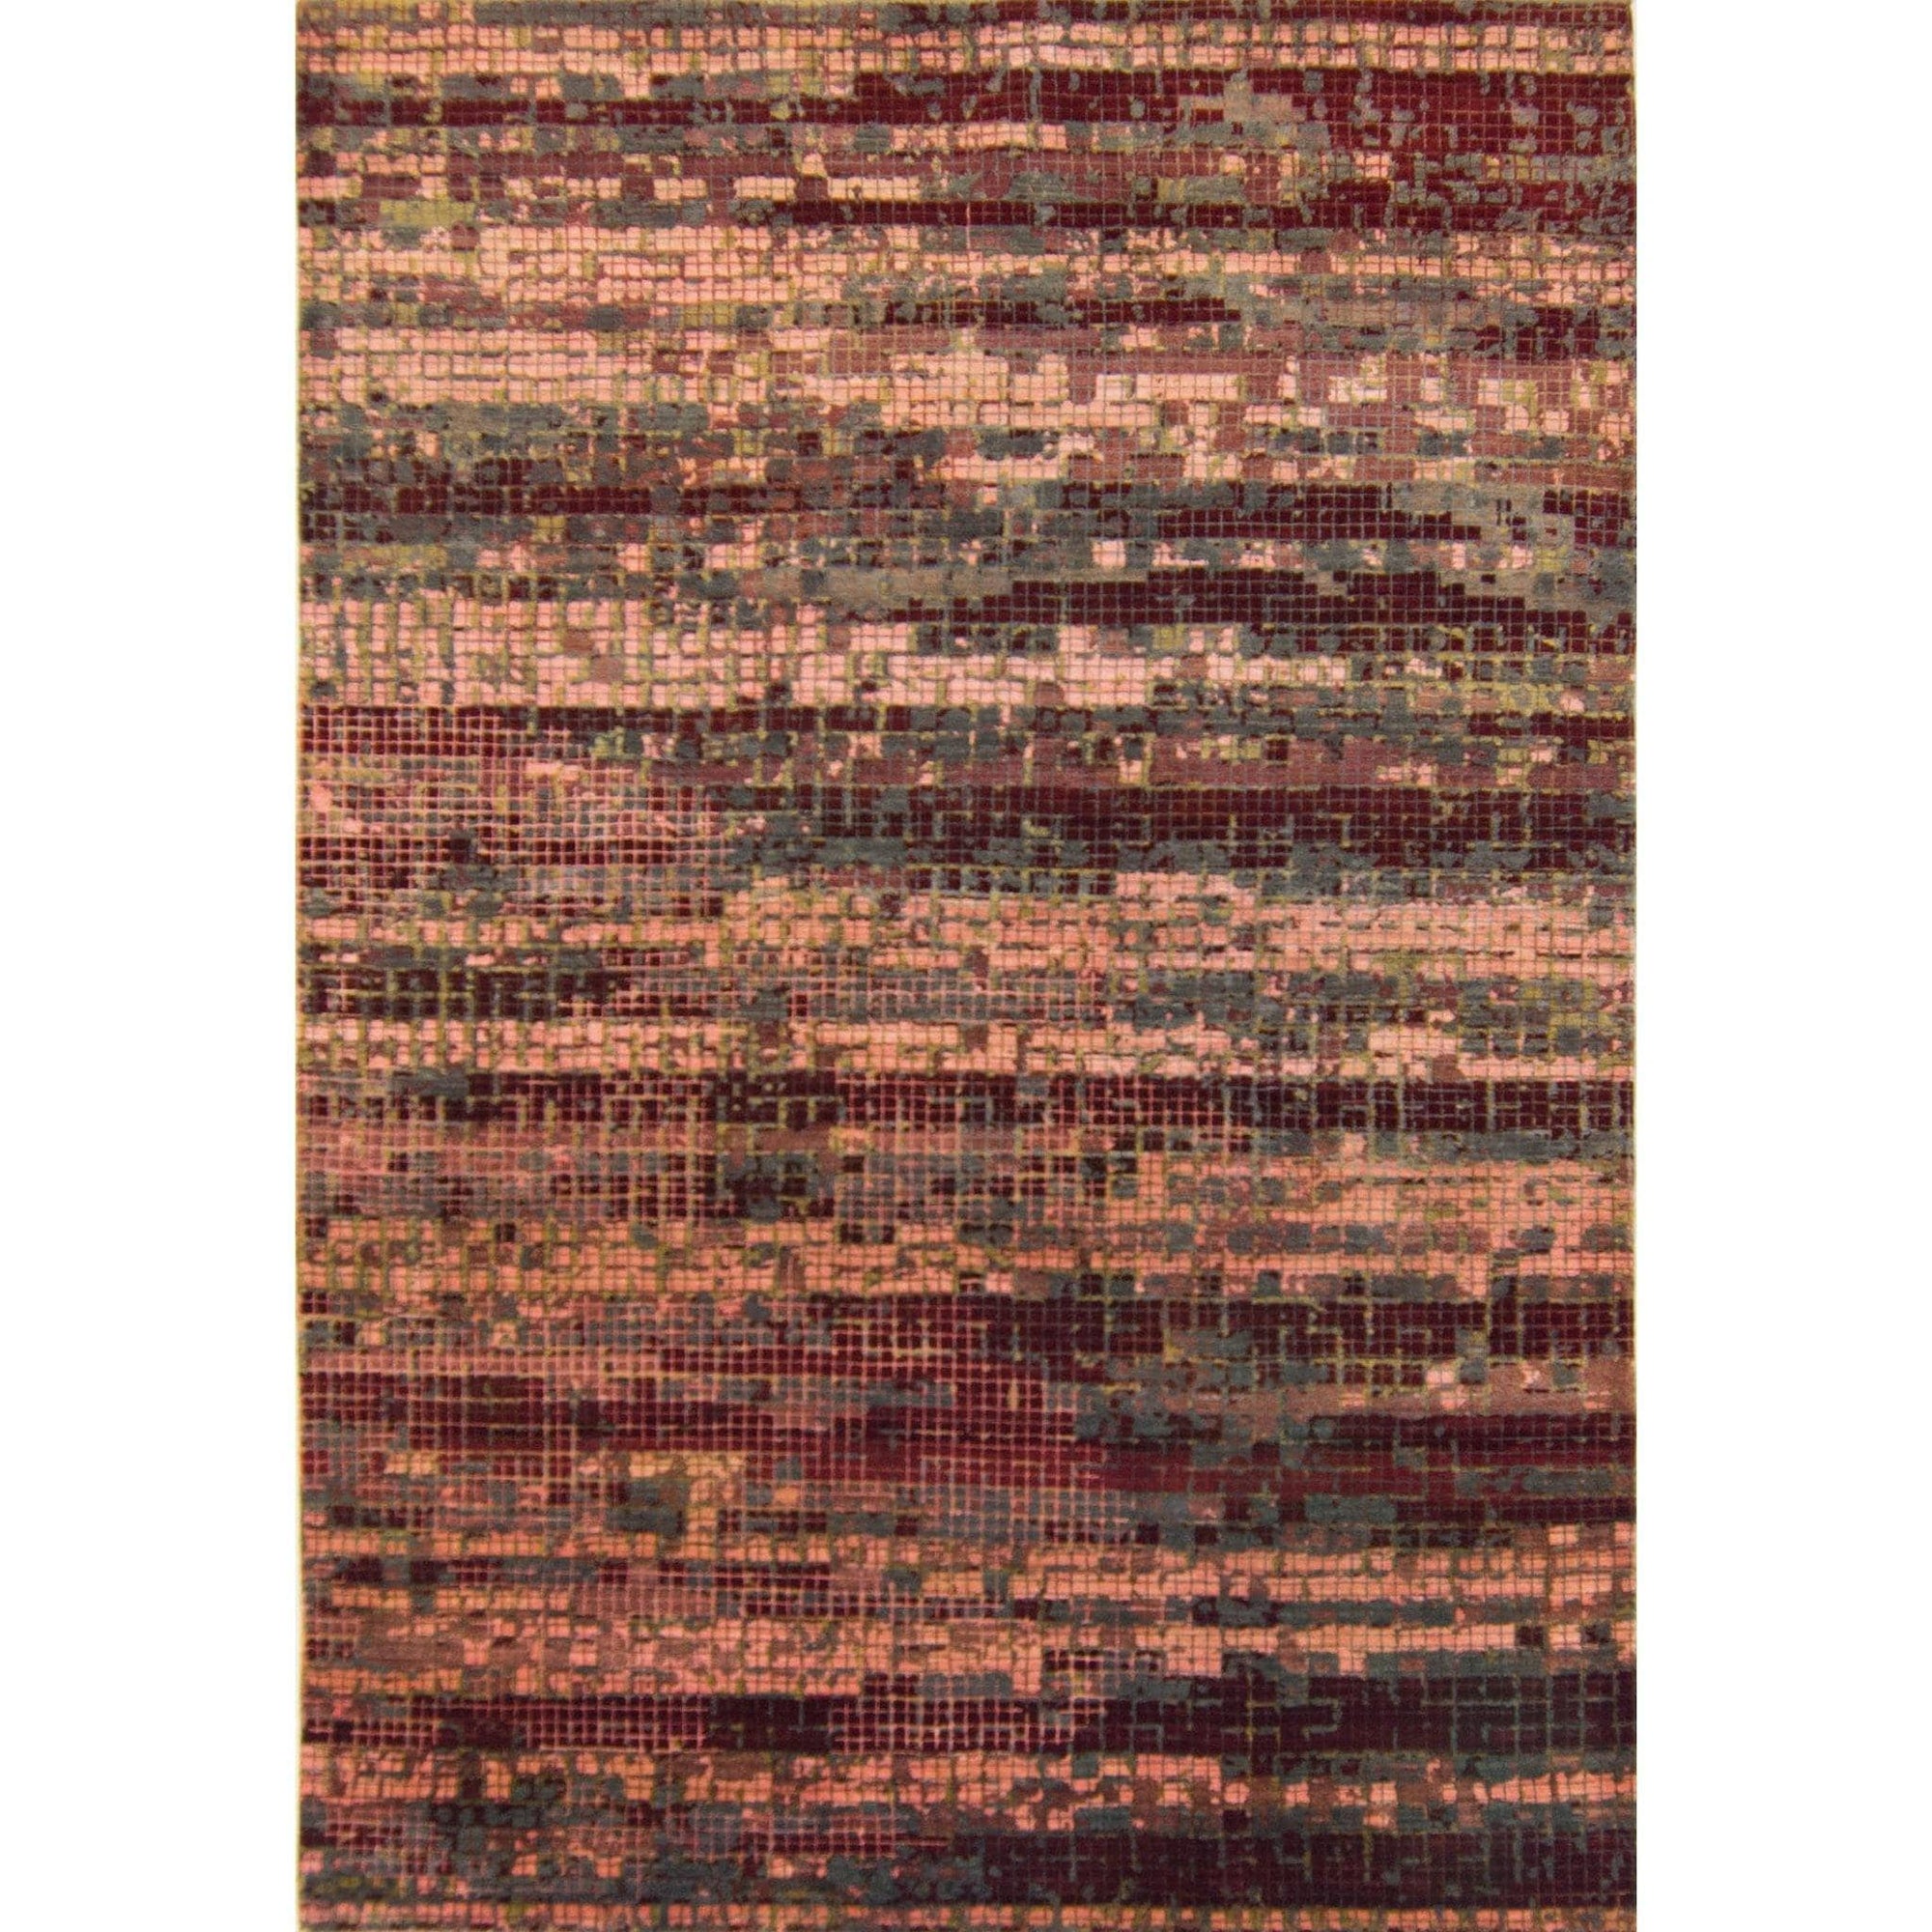 Hand-knotted Wool & Silk Contemporary Rug 202cm x 302cm